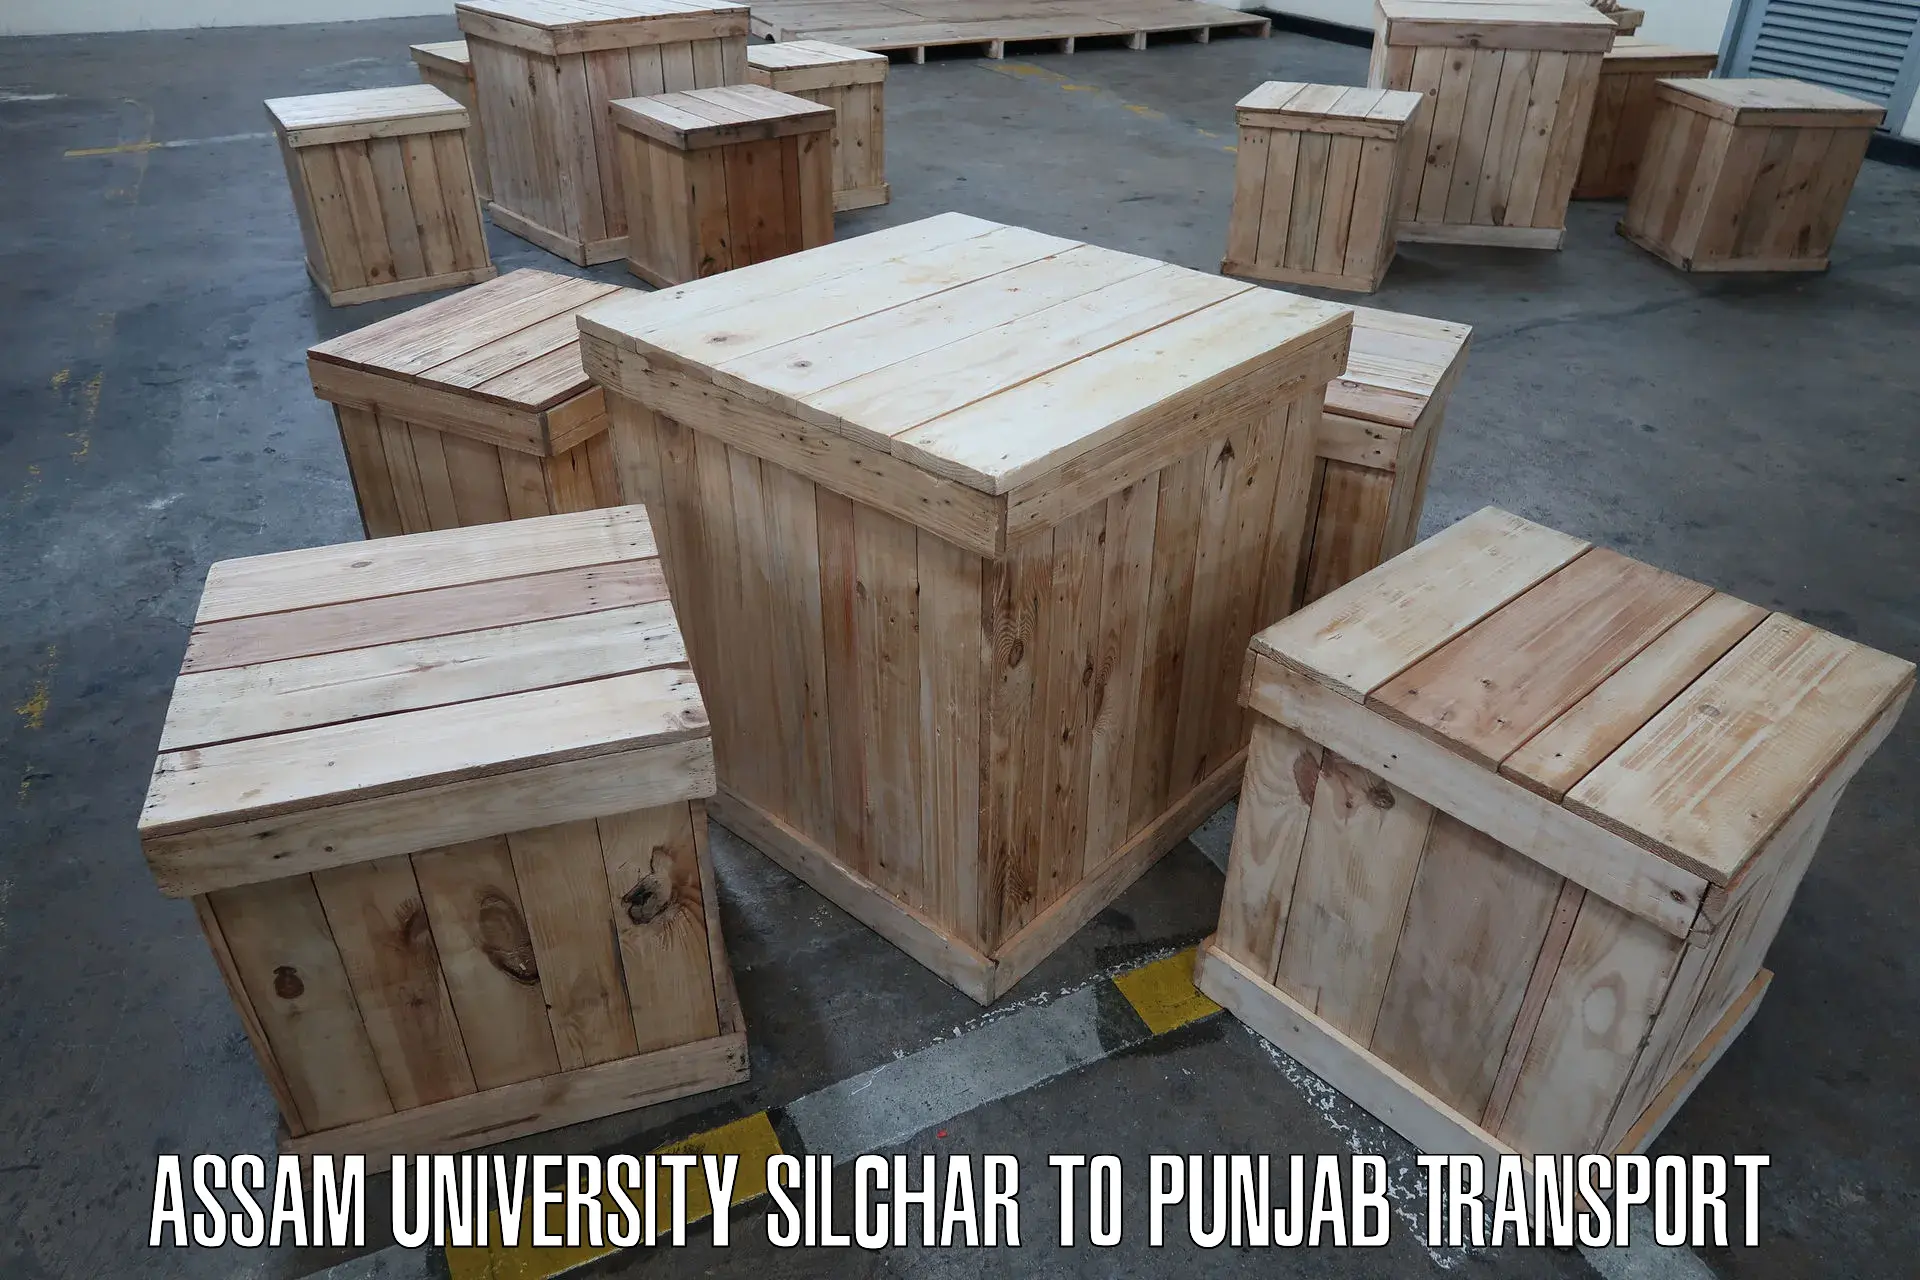 Container transport service Assam University Silchar to Patiala